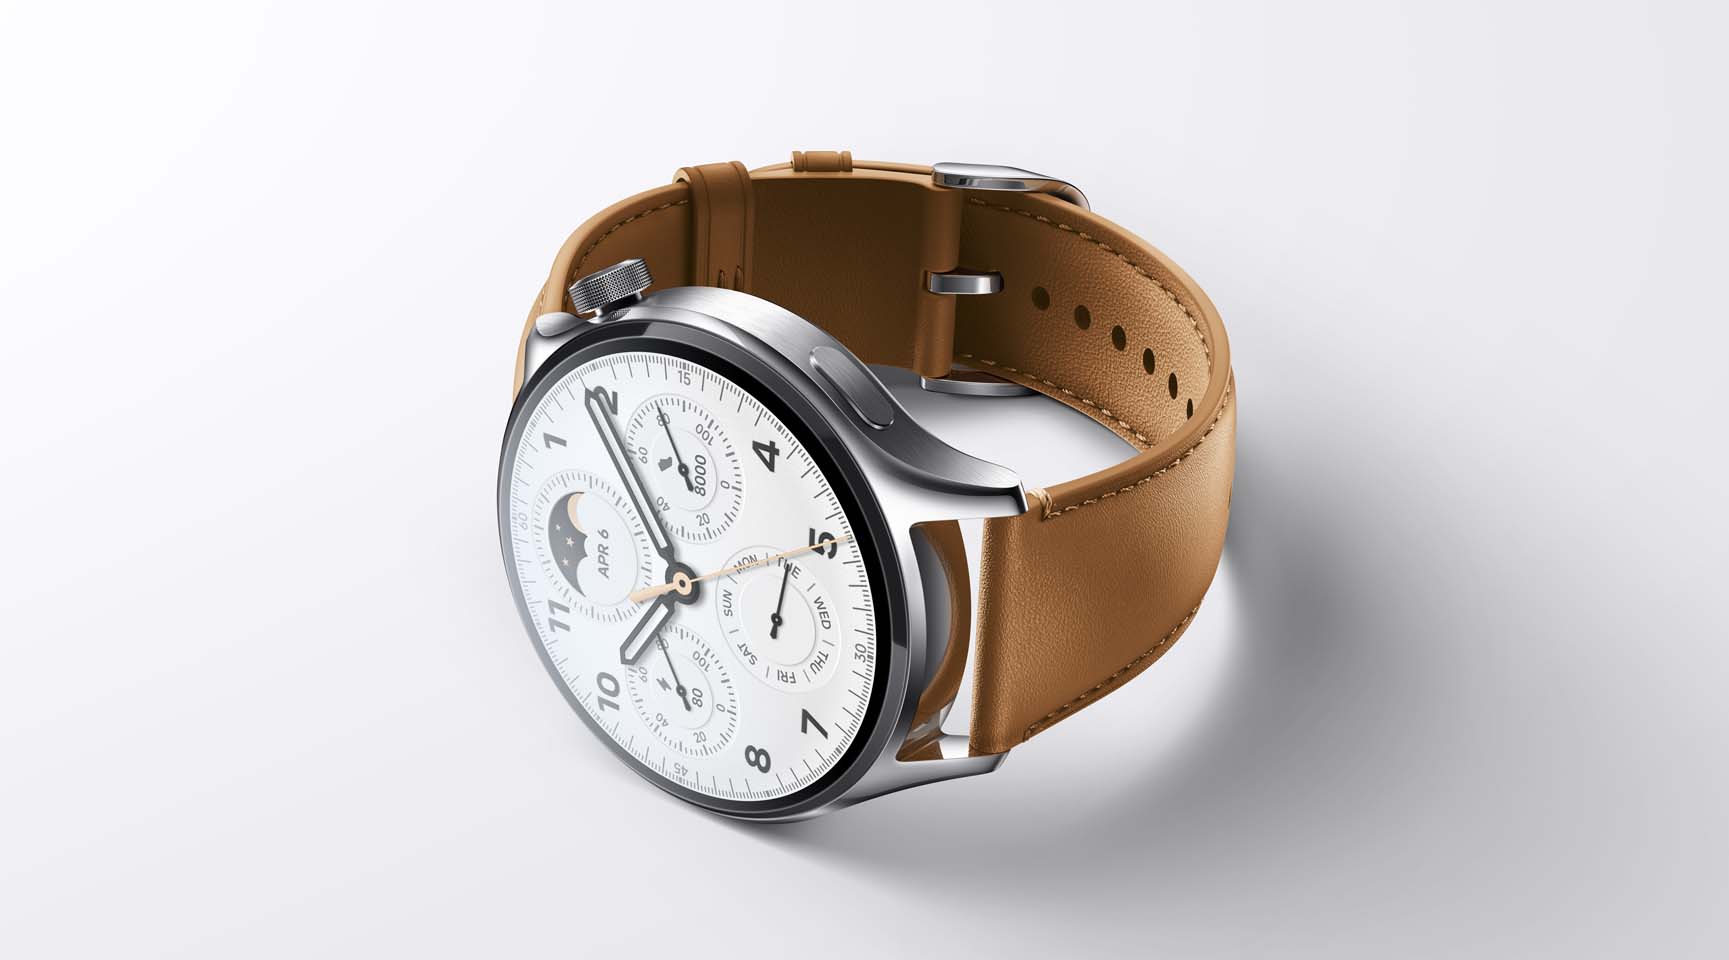 Xiaomi Watch S1 Pro brings out class and luxury - GadgetMatch